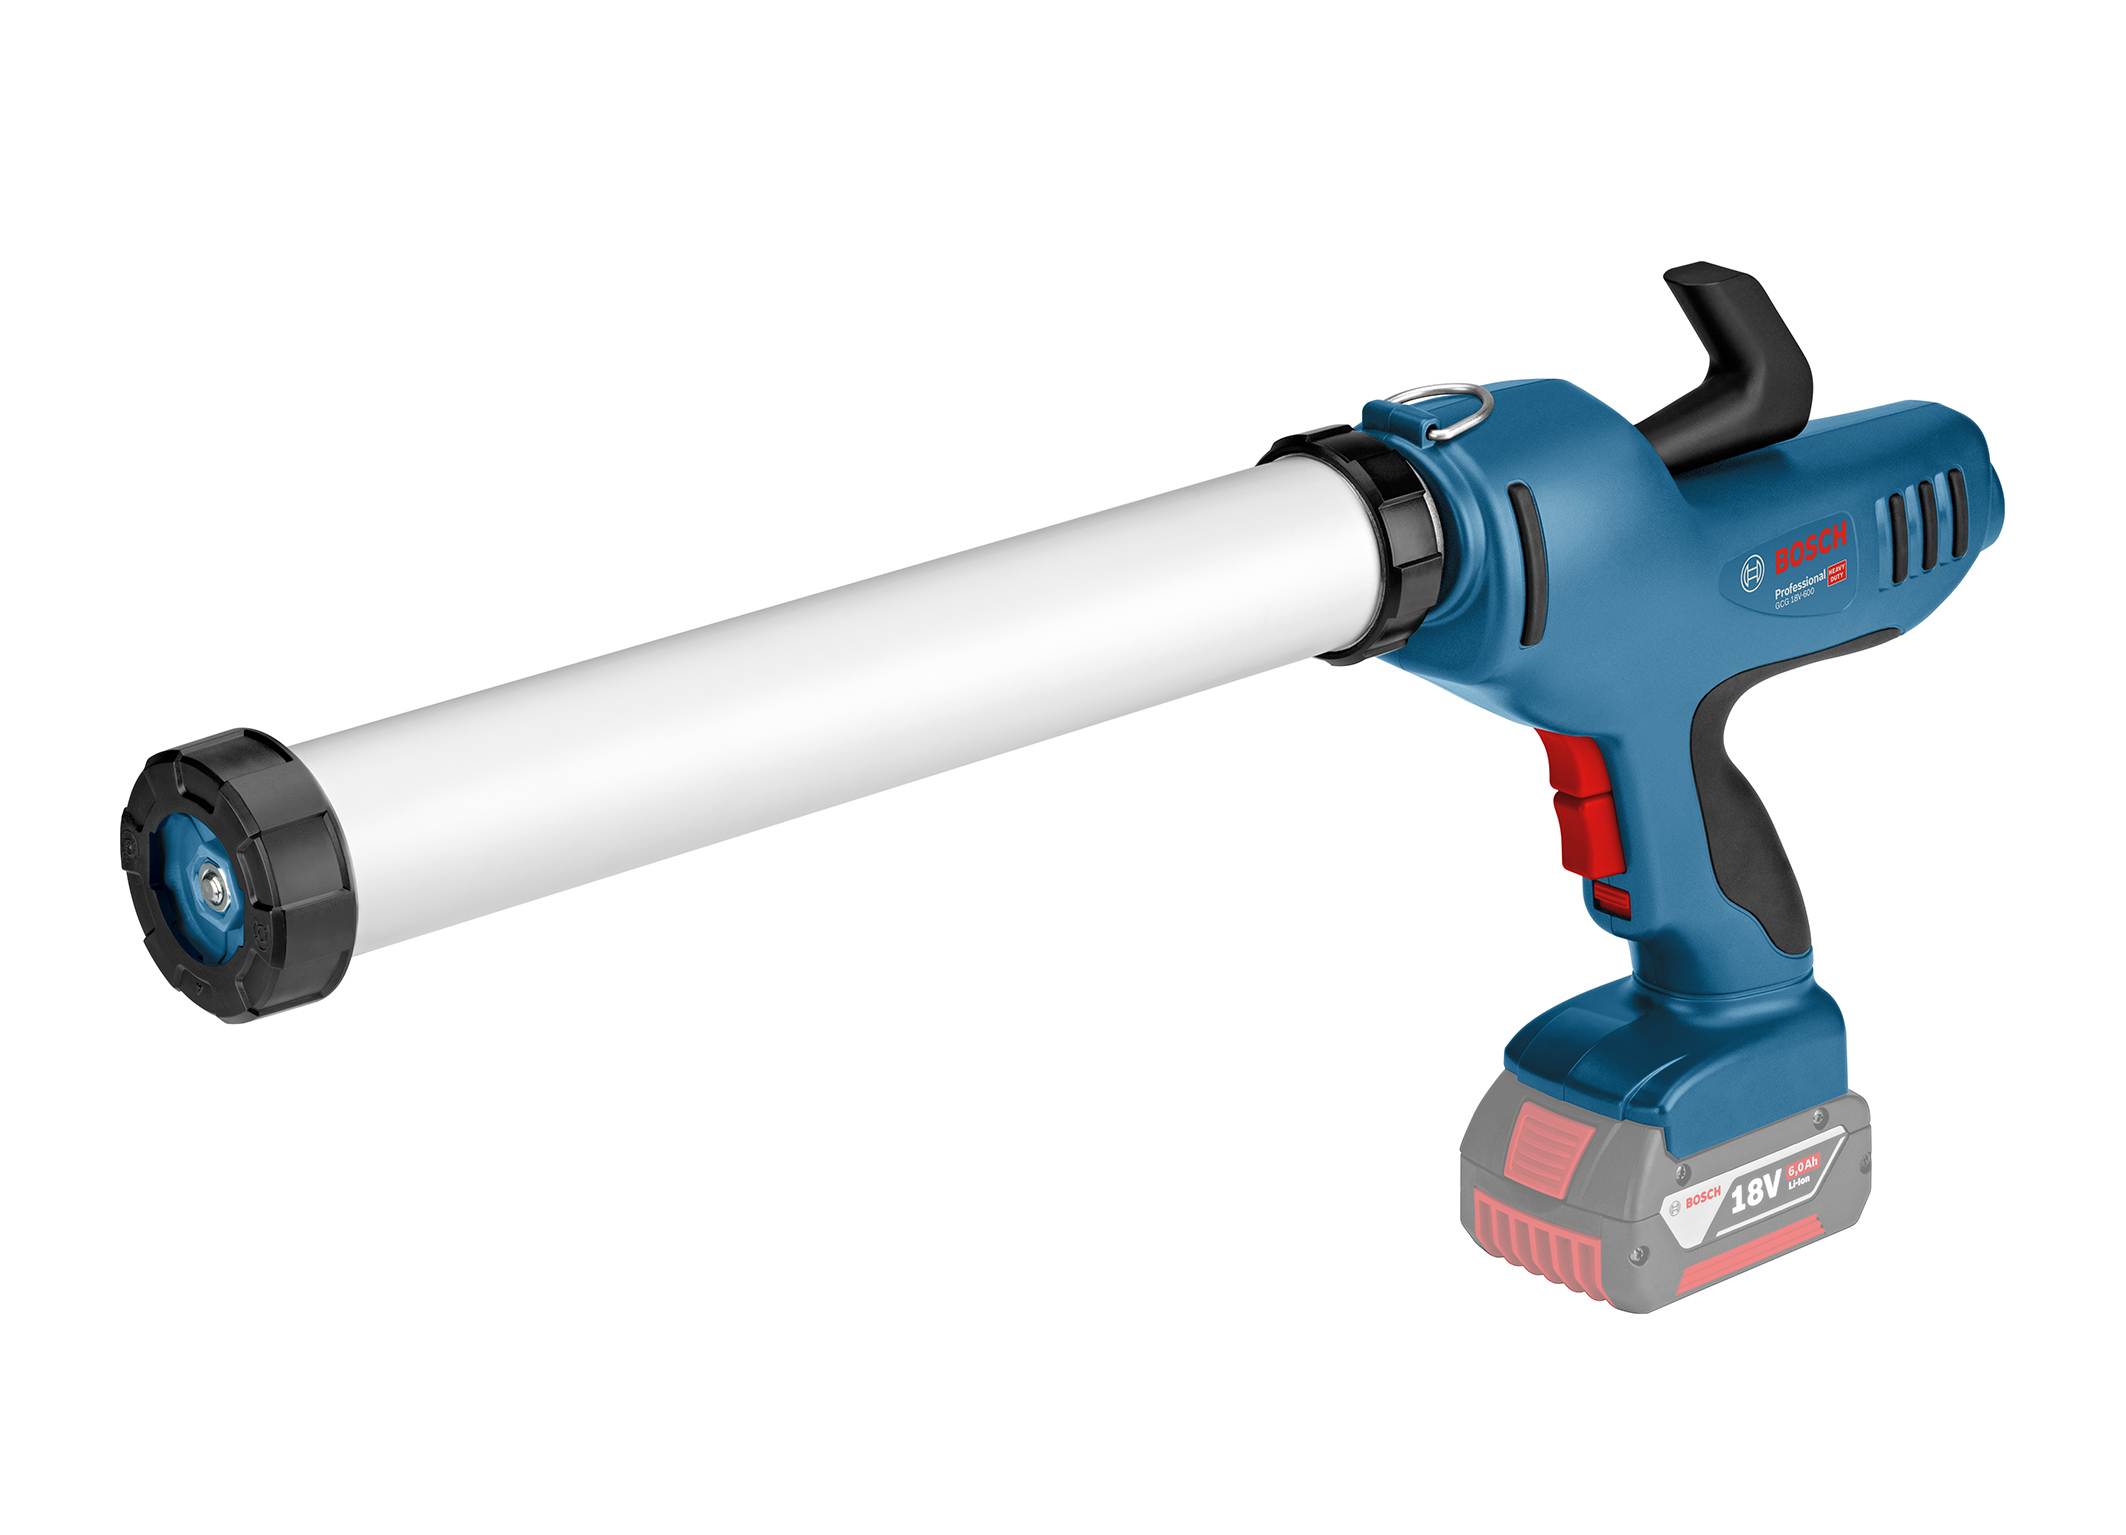 Full compatibility with the existing 18 volt range: New cordless impact drivers from Bosch for professionals